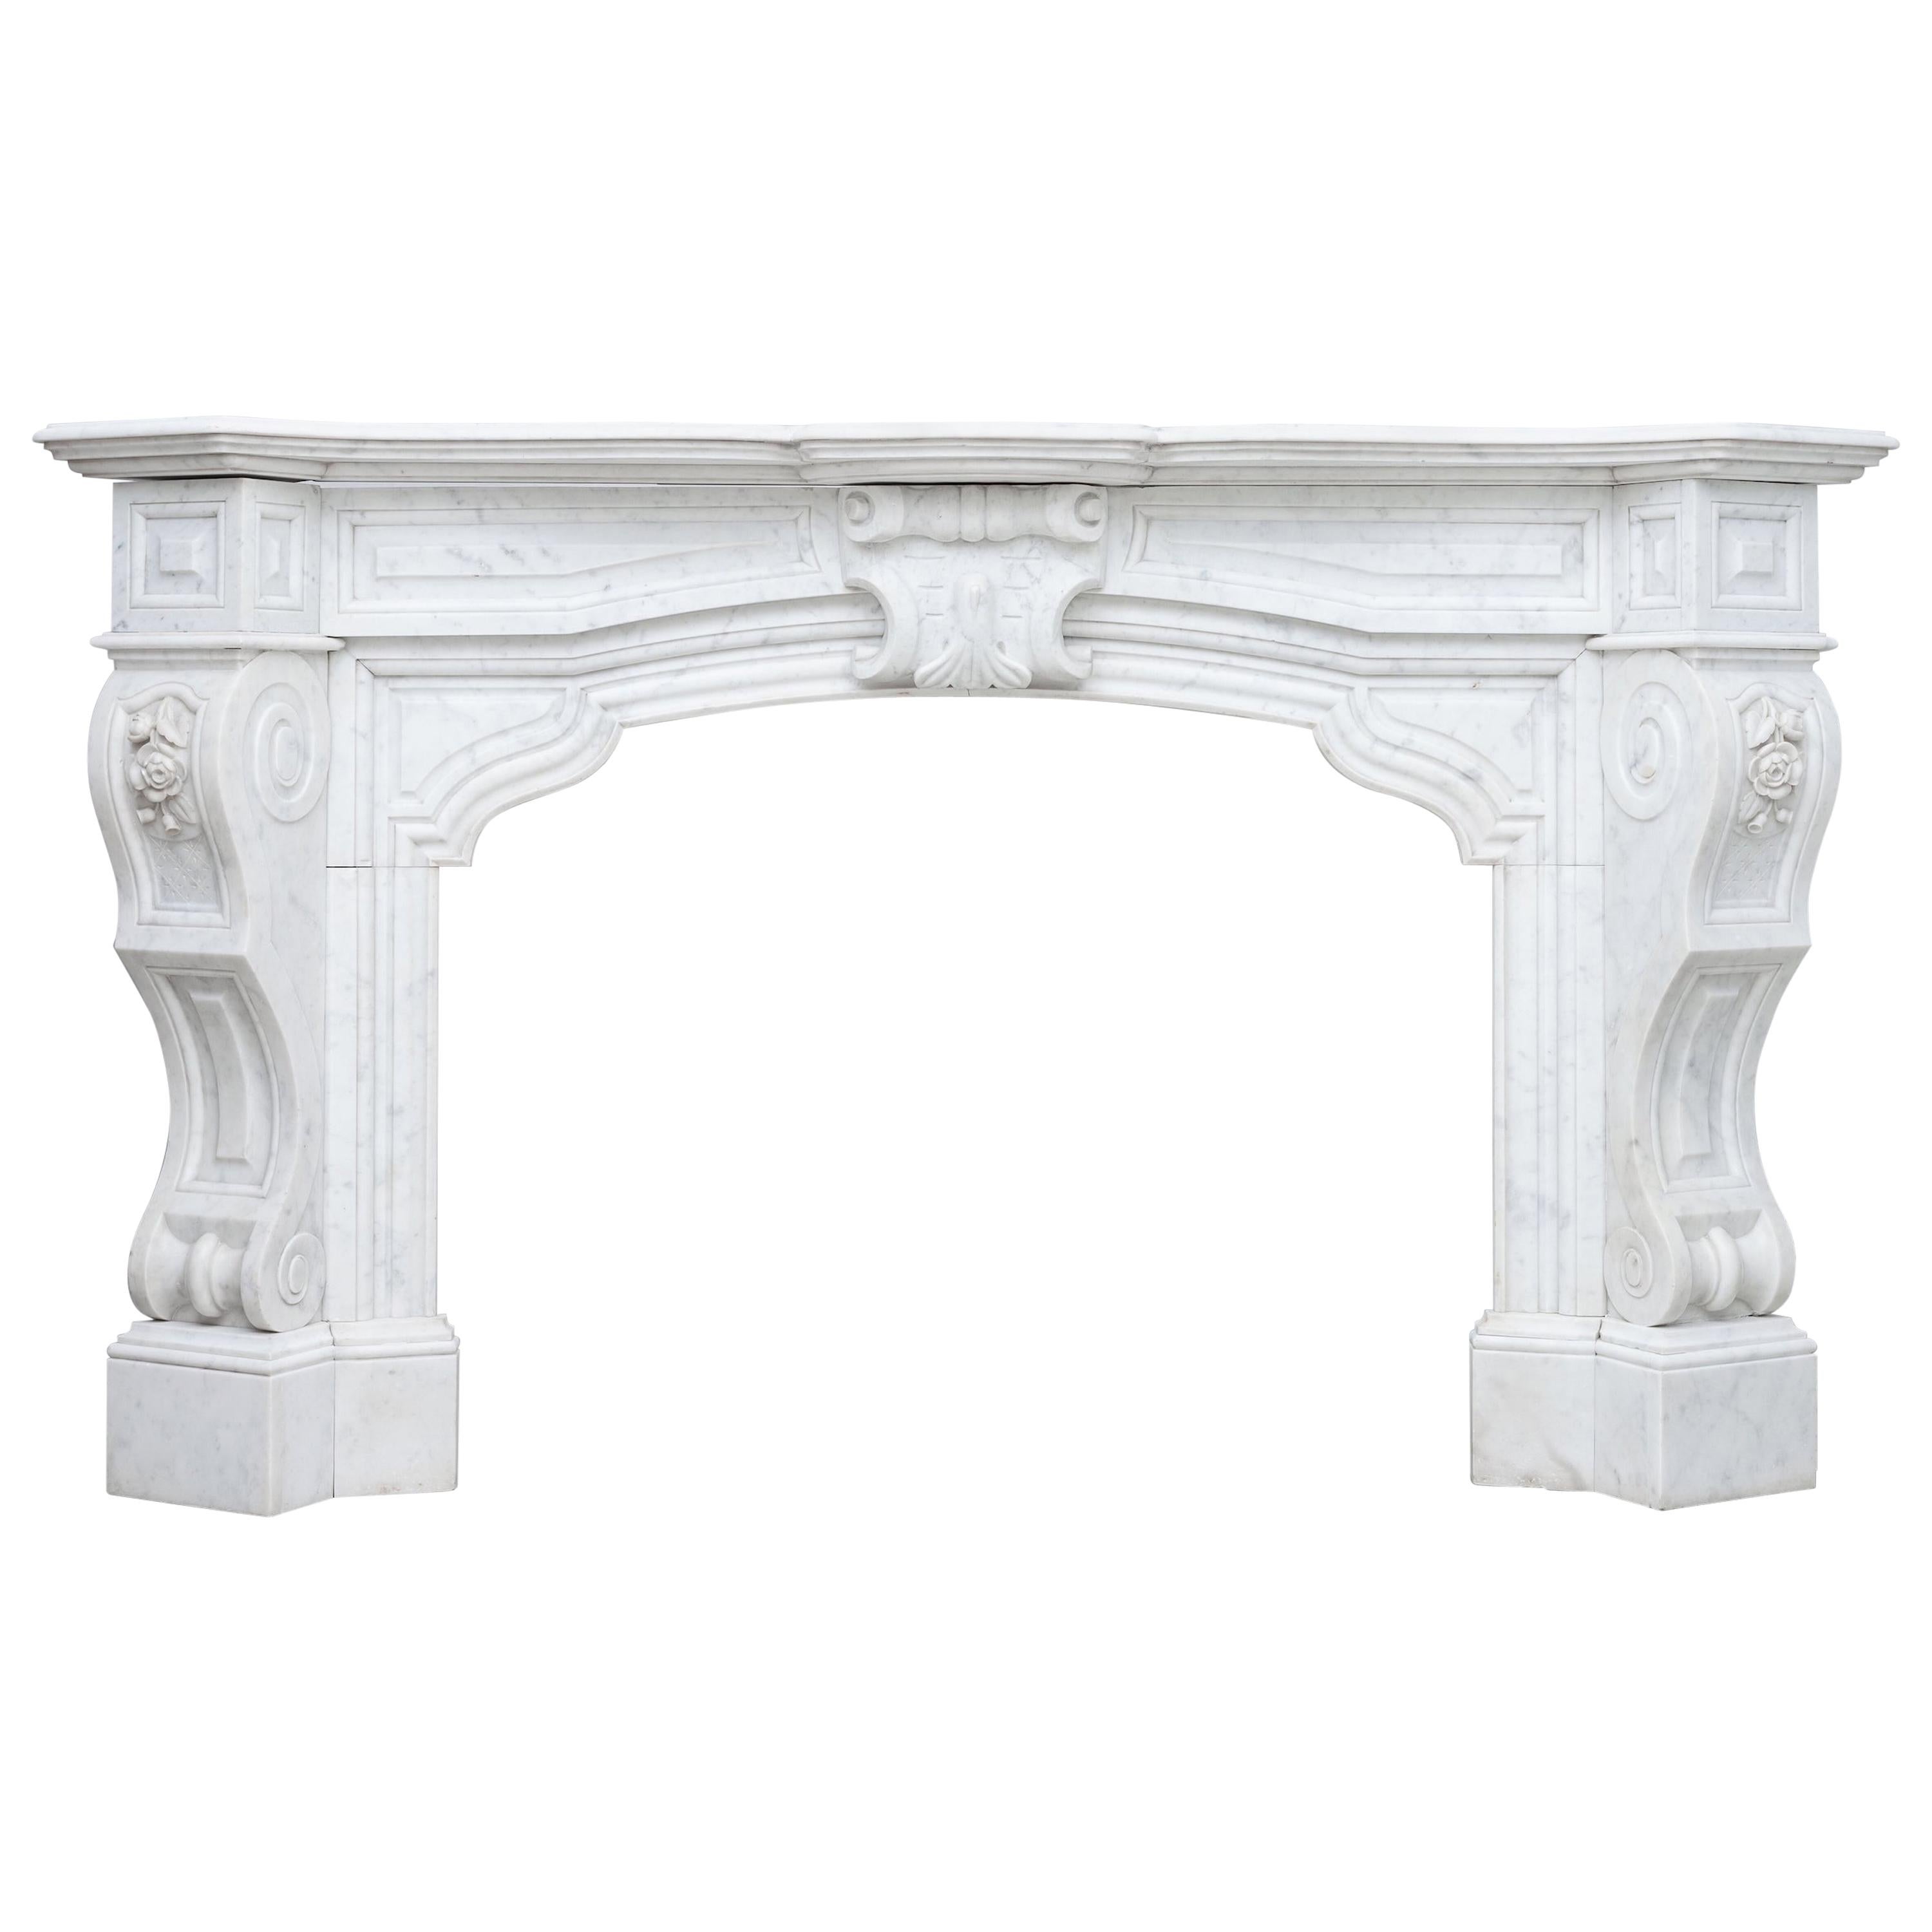 Neoclassical French Carrara Marble White Antique Fireplace For Sale